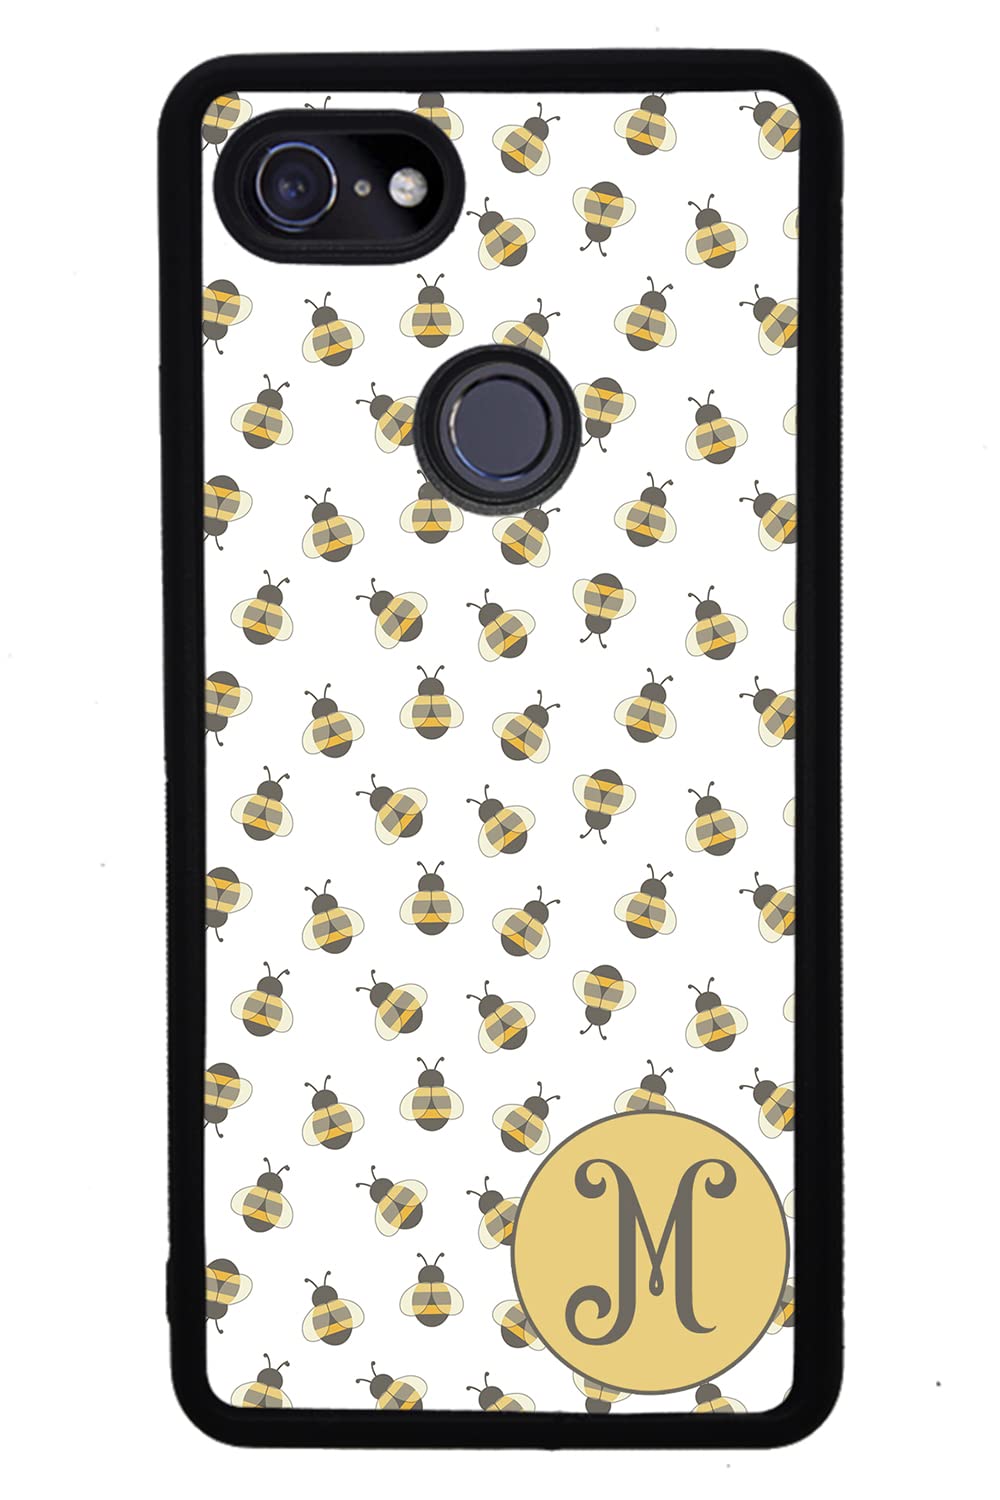 Honey Bumble Bee Personalized Black Rubber Phone Case Compatible With Google Pixel 8 Pro, 8a, 8, 7a, 7, Pixel 7 Pro, 6a, Pixel 6 Pro, 6, 5, 4a 5G, 4a 4G, 4, 4 XL, 3a, 3a XL, 3, 3 XL, 2 XL, 2